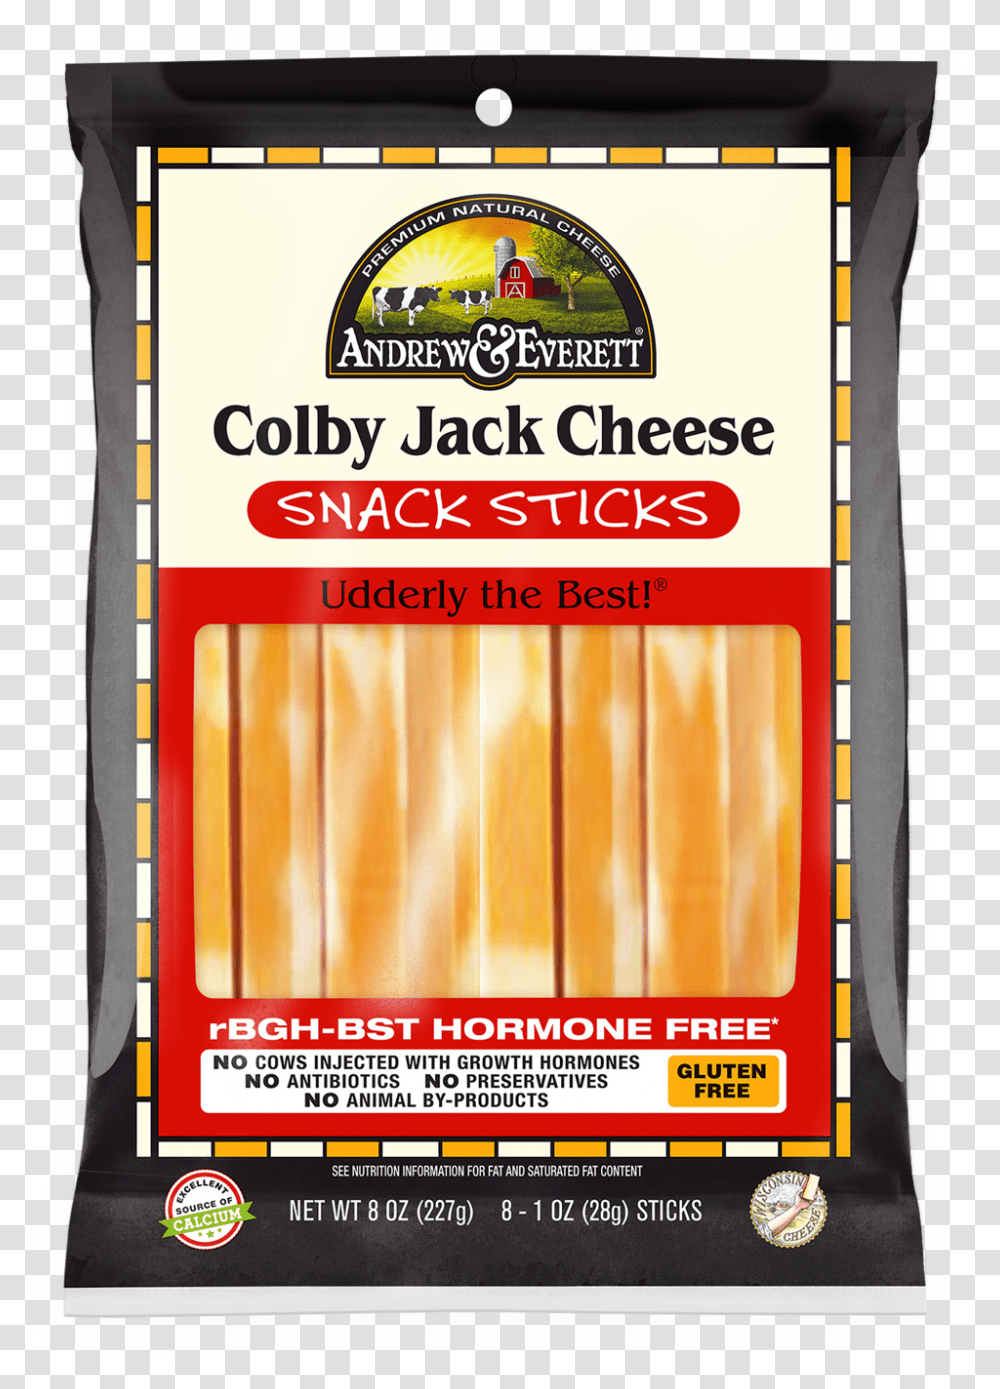 Colby Jack Cheese Sticks Package, Food, Advertisement, Flyer, Poster Transparent Png